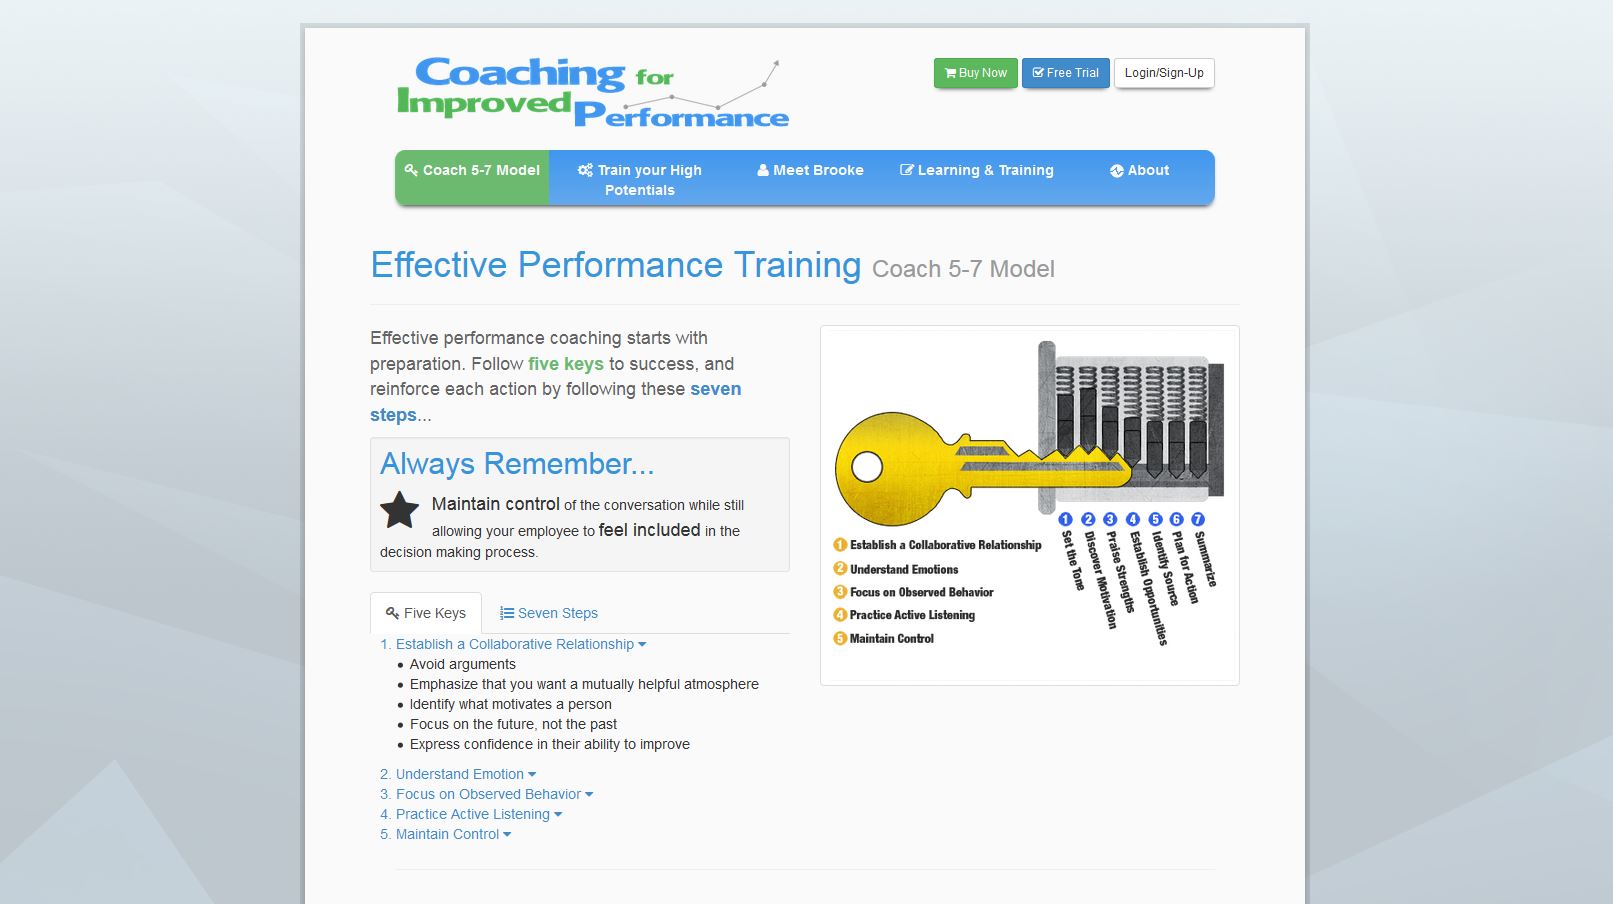 Coaching for Improved Performance